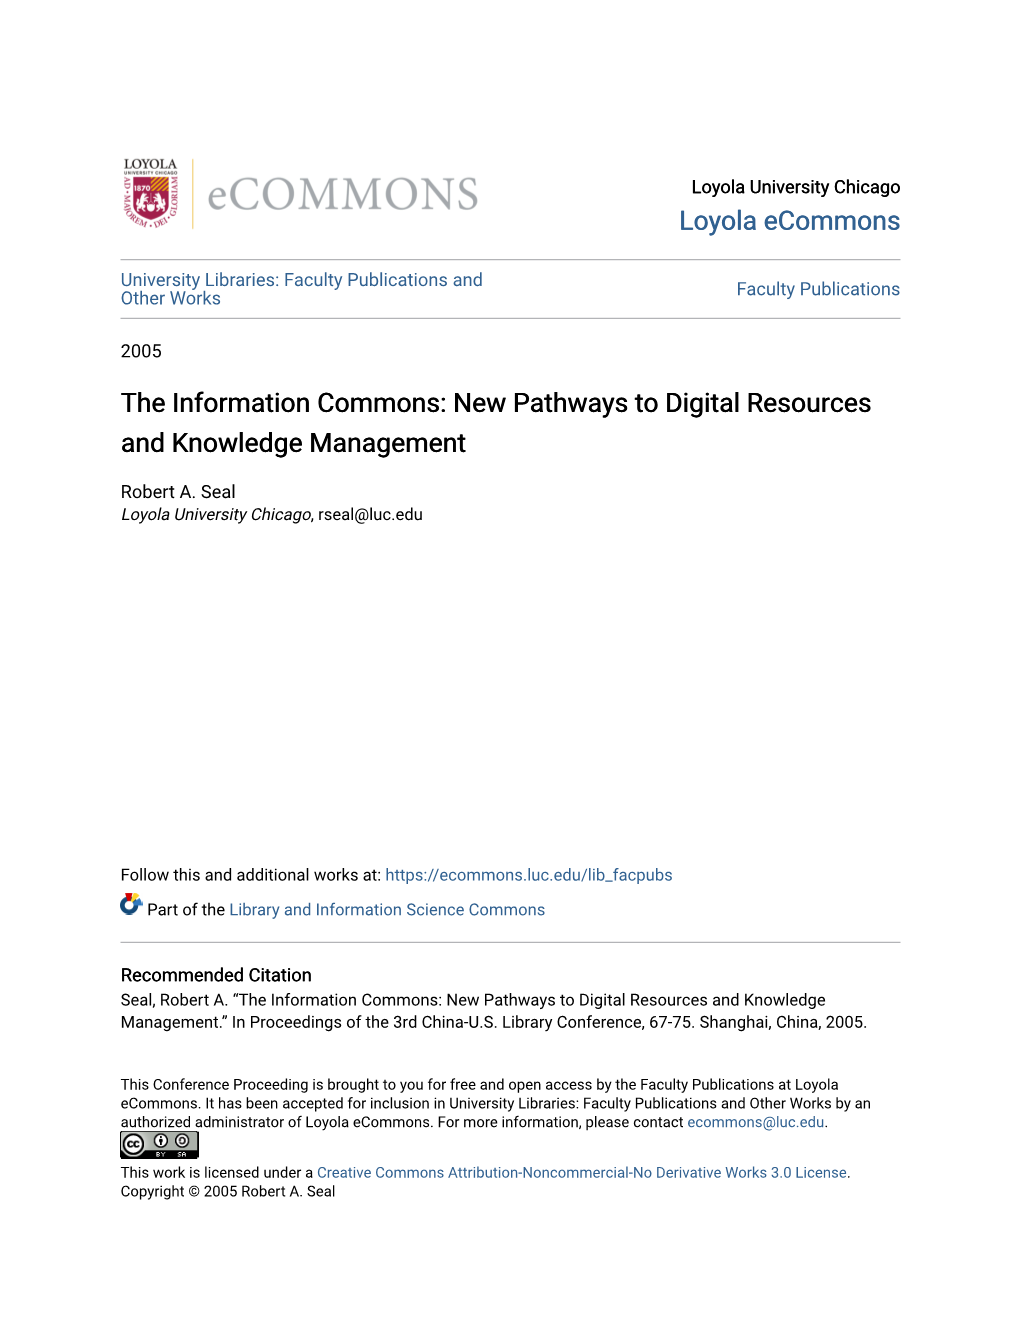 The Information Commons: New Pathways to Digital Resources and Knowledge Management